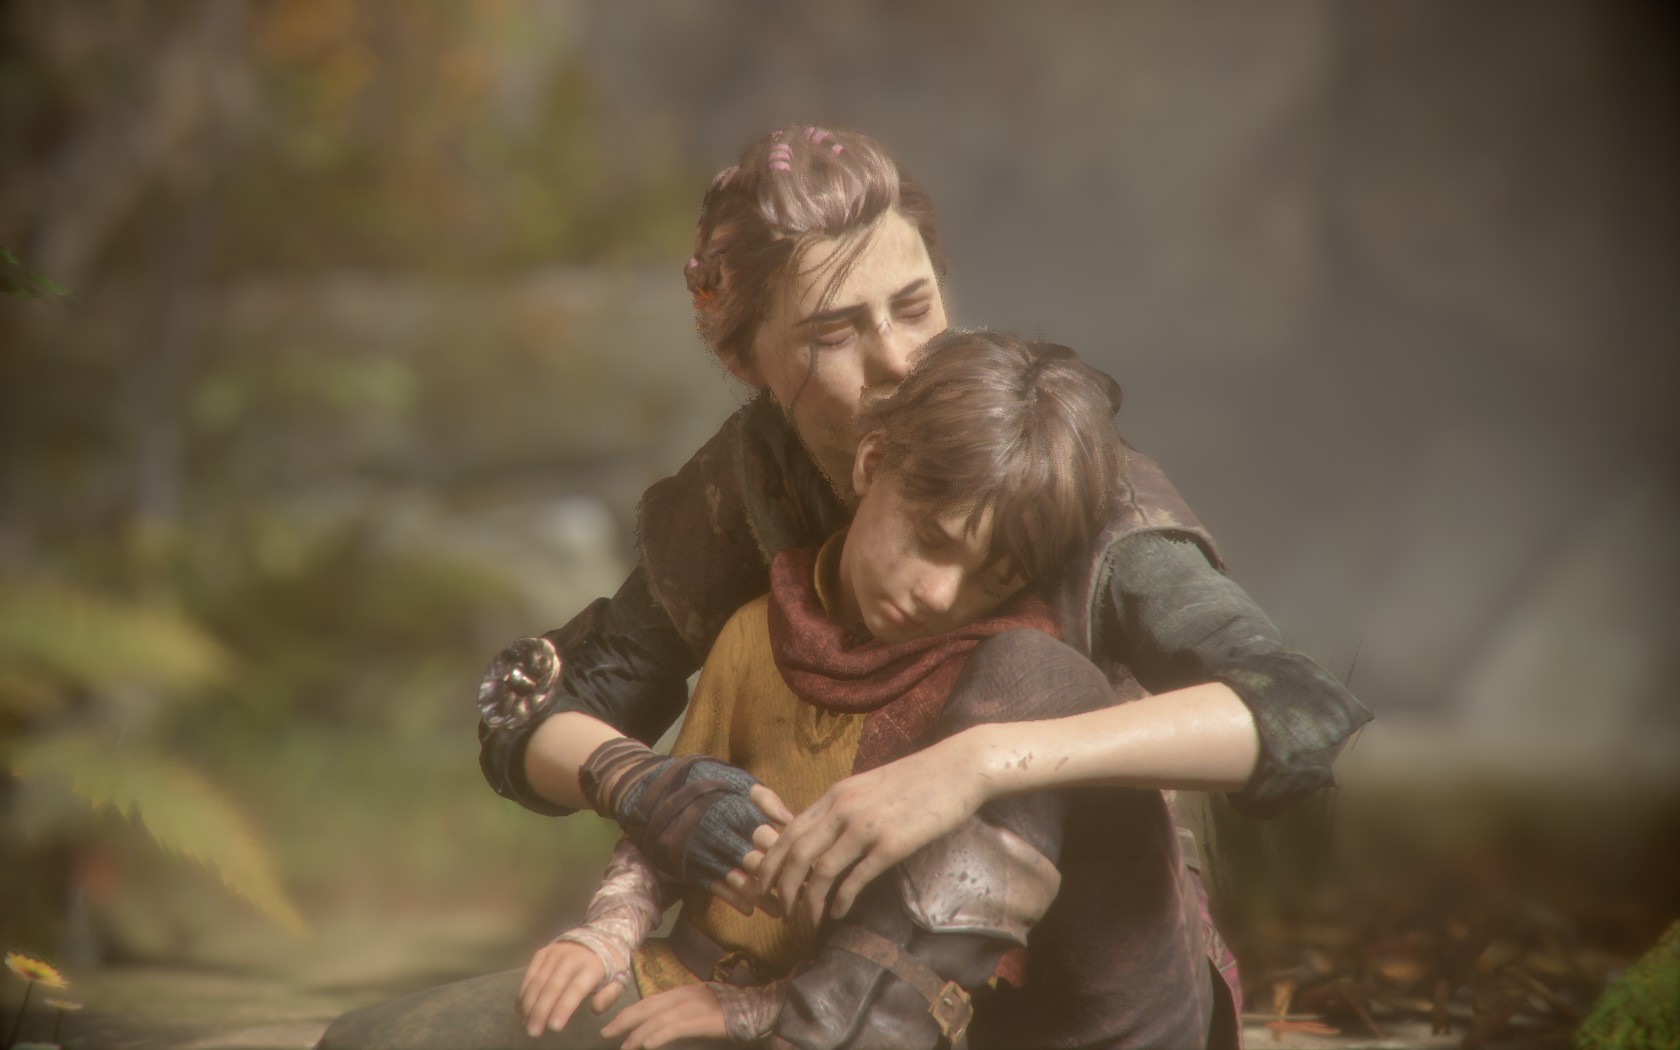 A Raticulously Good Upgrade - A Plague Tale: Innocence PS5 Review —  GAMINGTREND